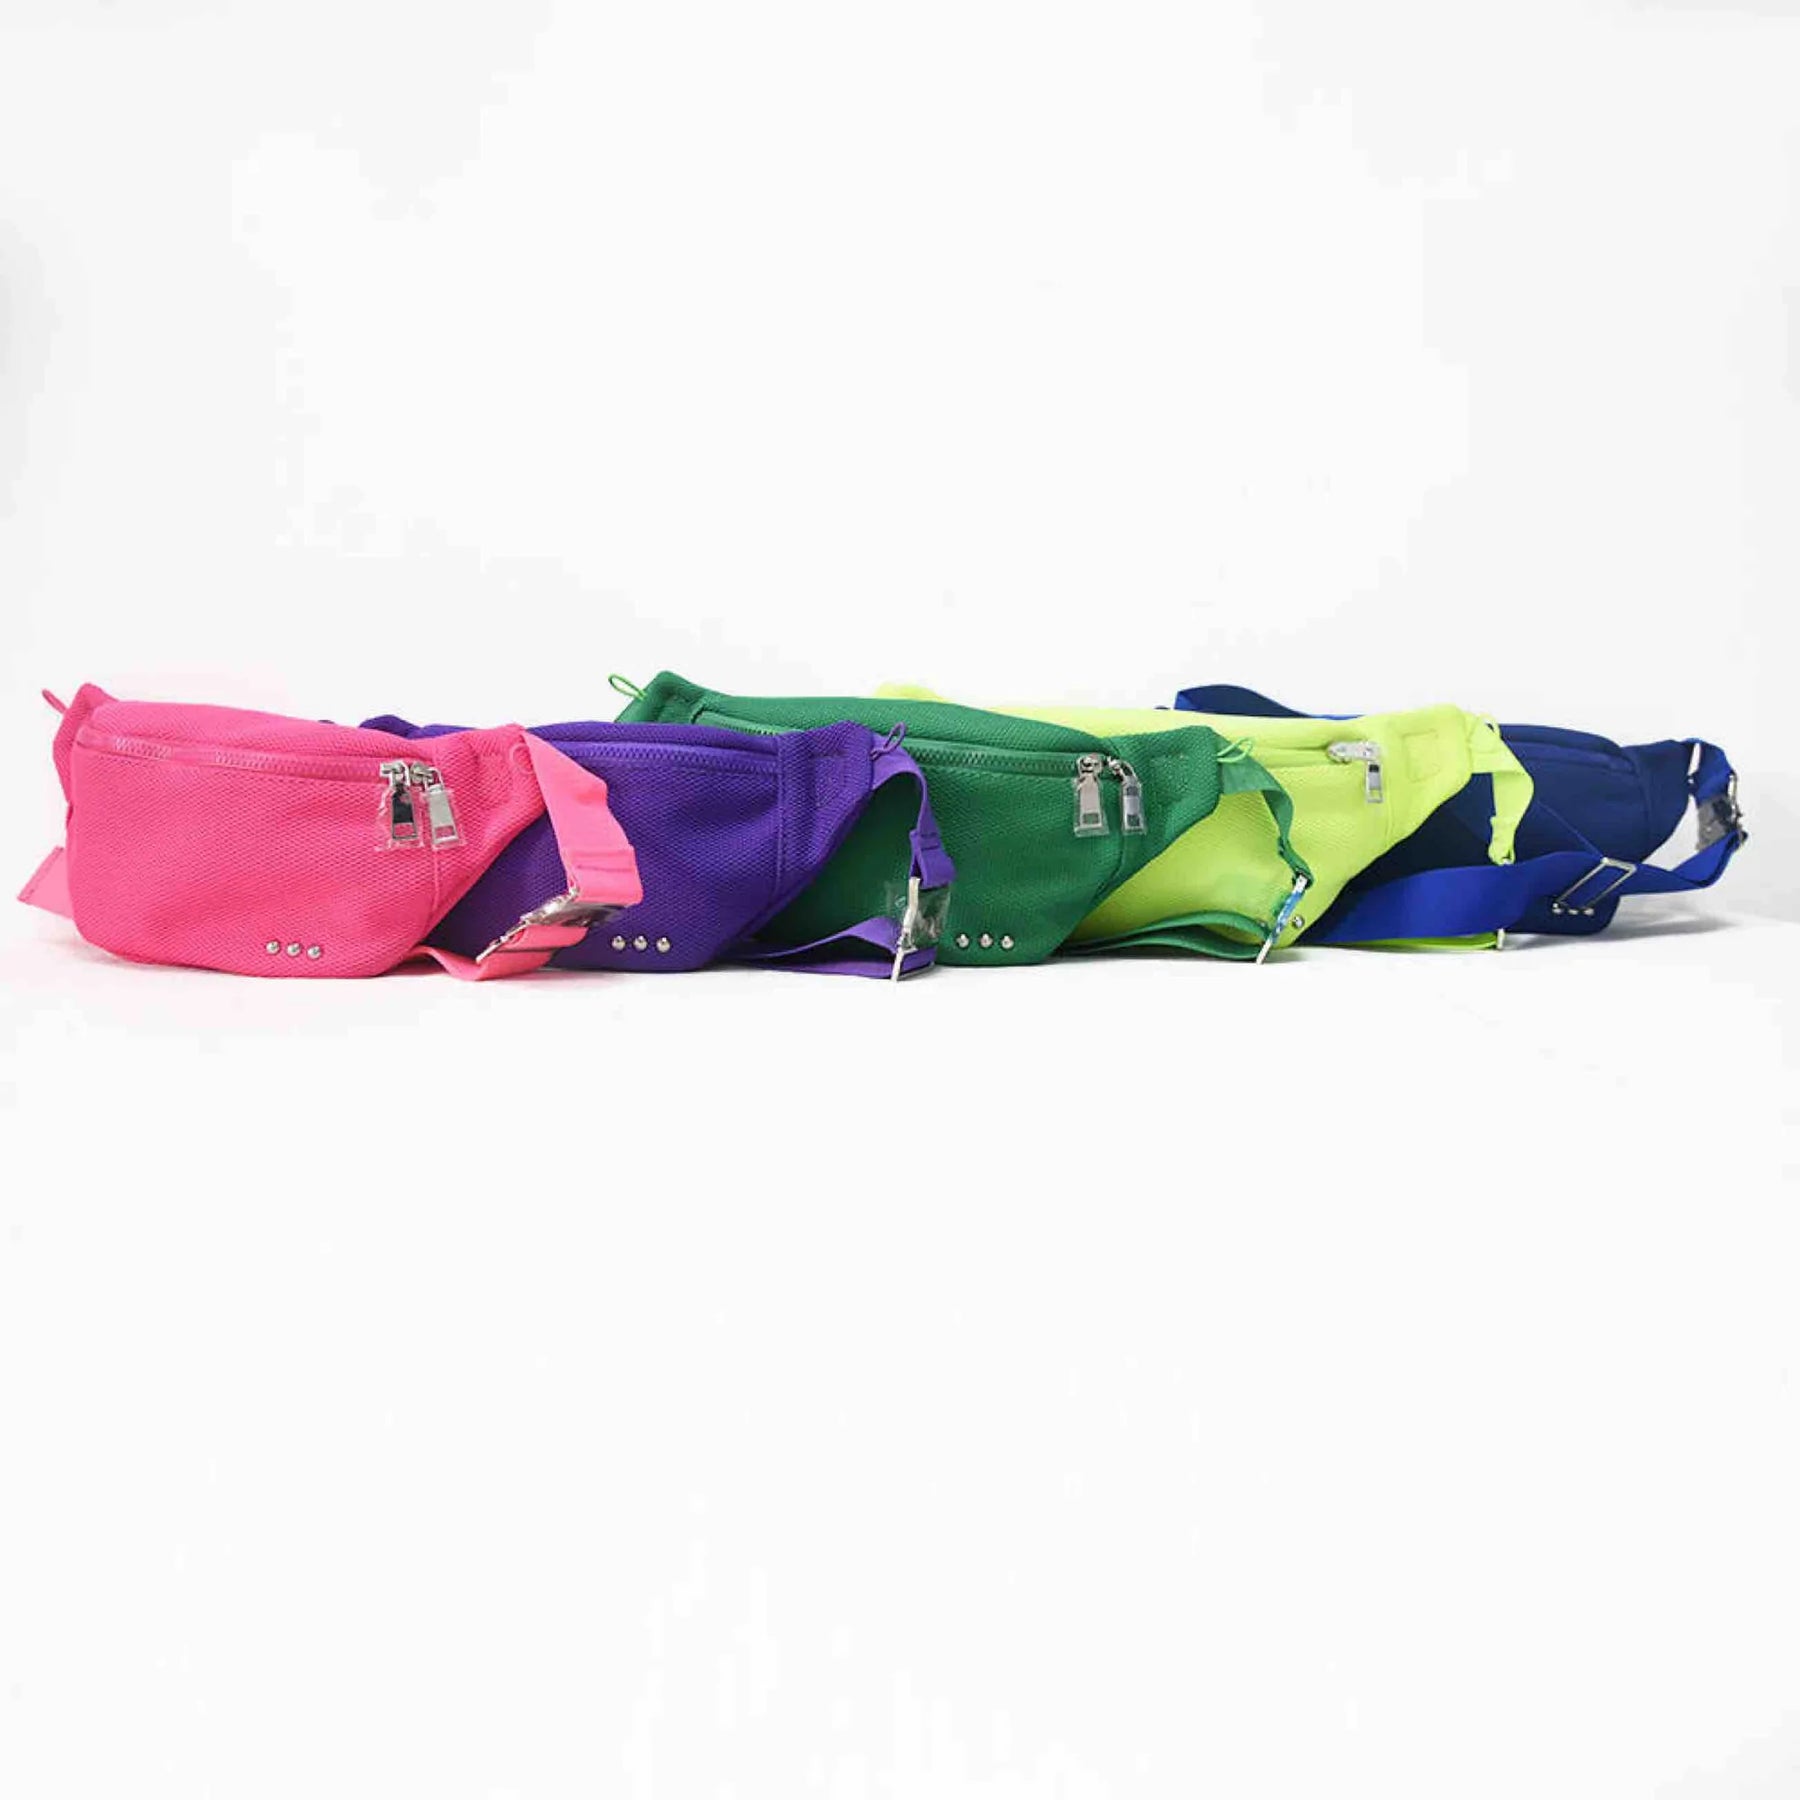 Fast and Free Athletic Bag - Chartreuse